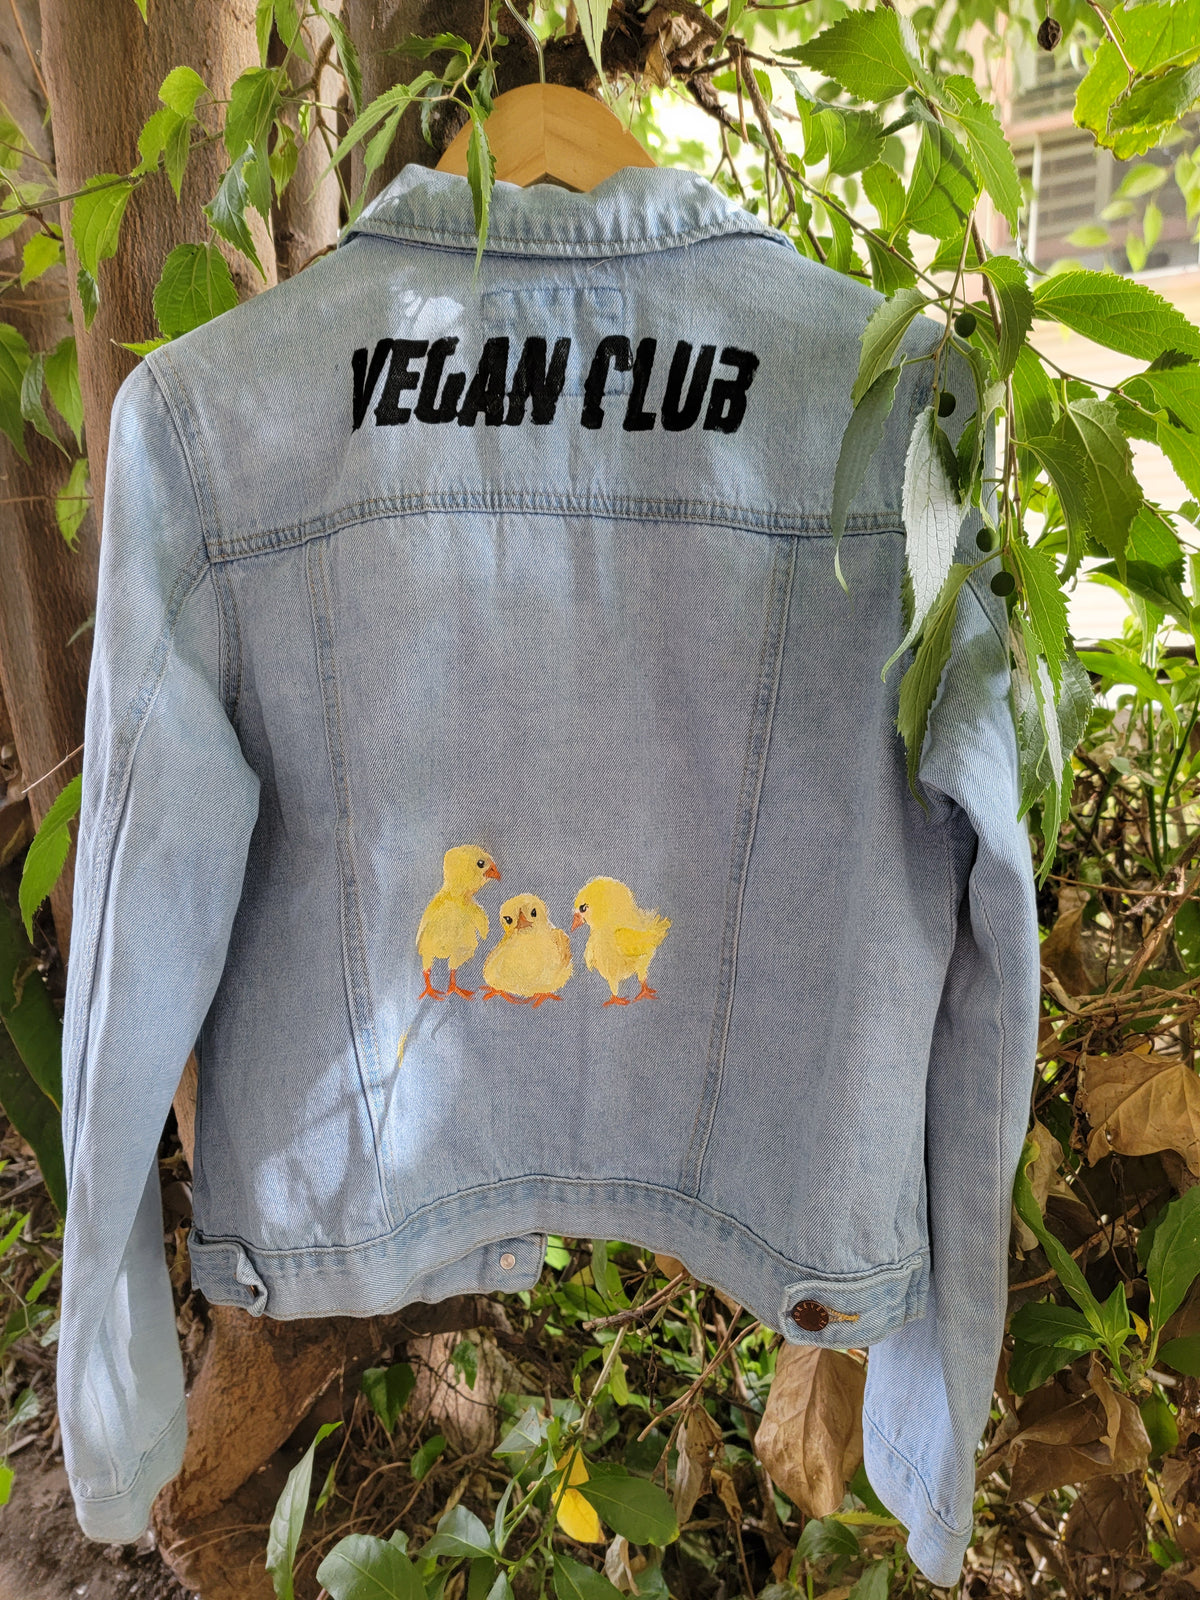 One of a Kind Brandi Jae Collab Jean Jacket "Vegan for the chicks"